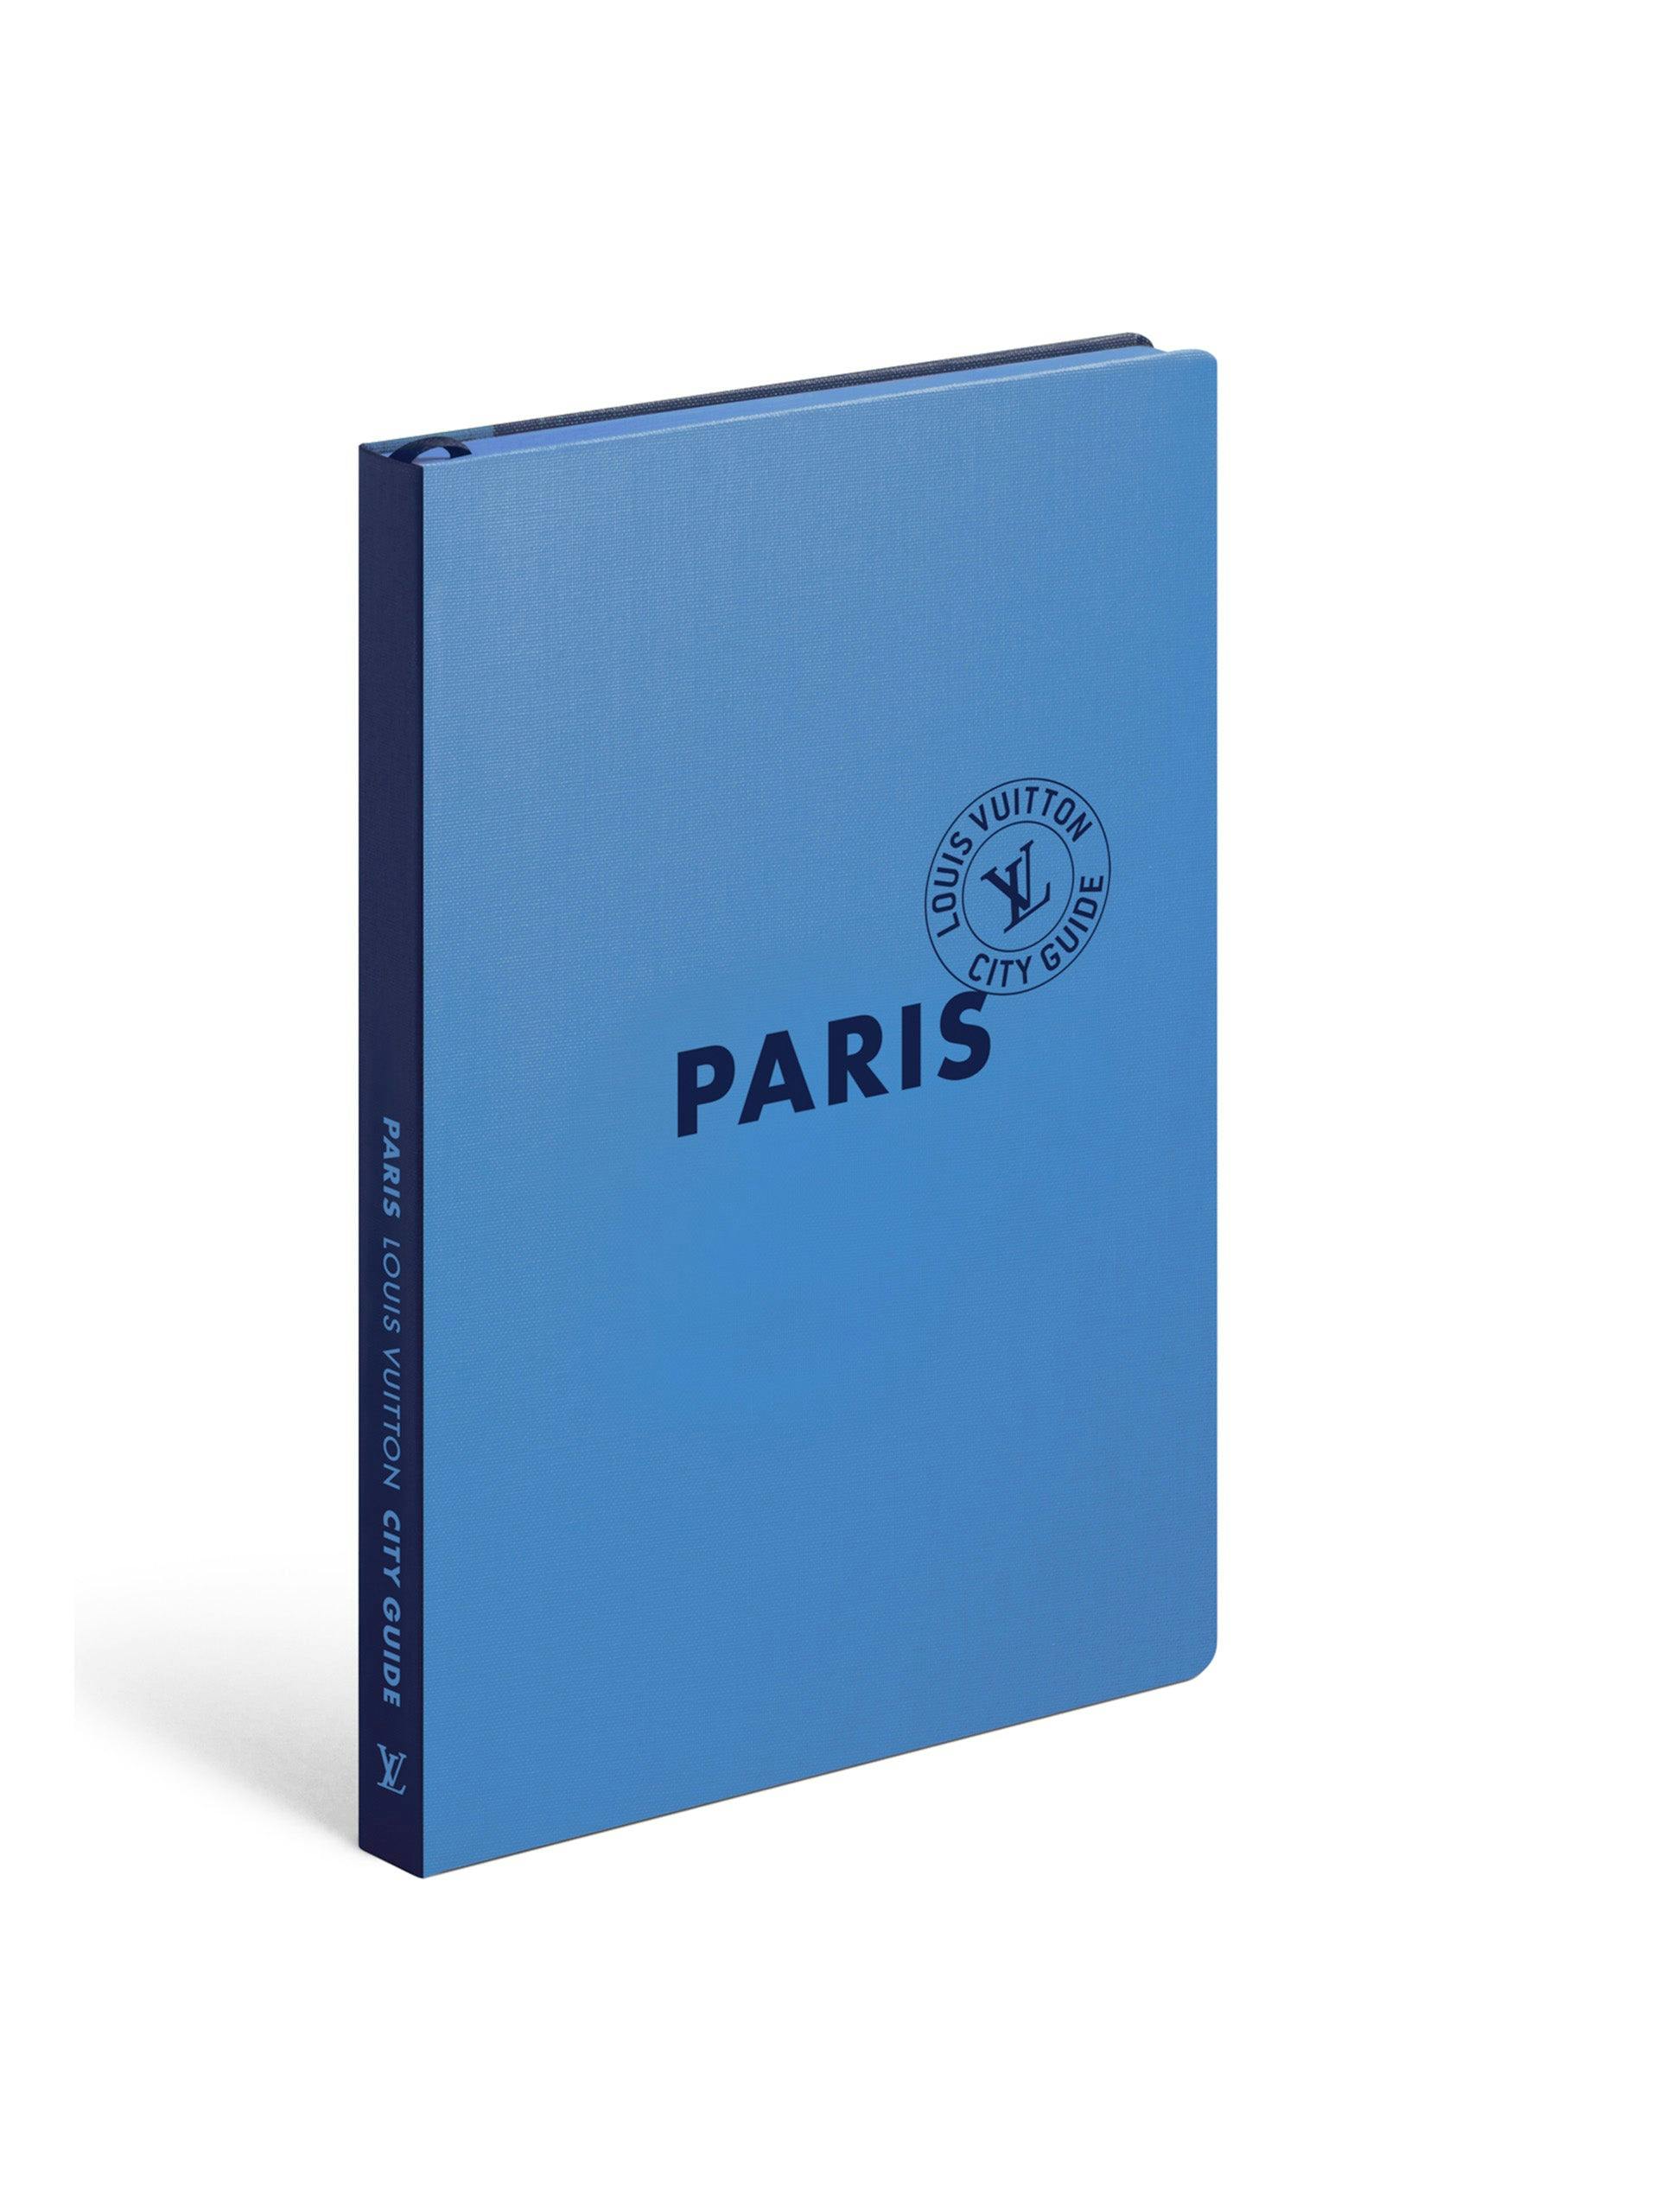 Paris City Guide, French version